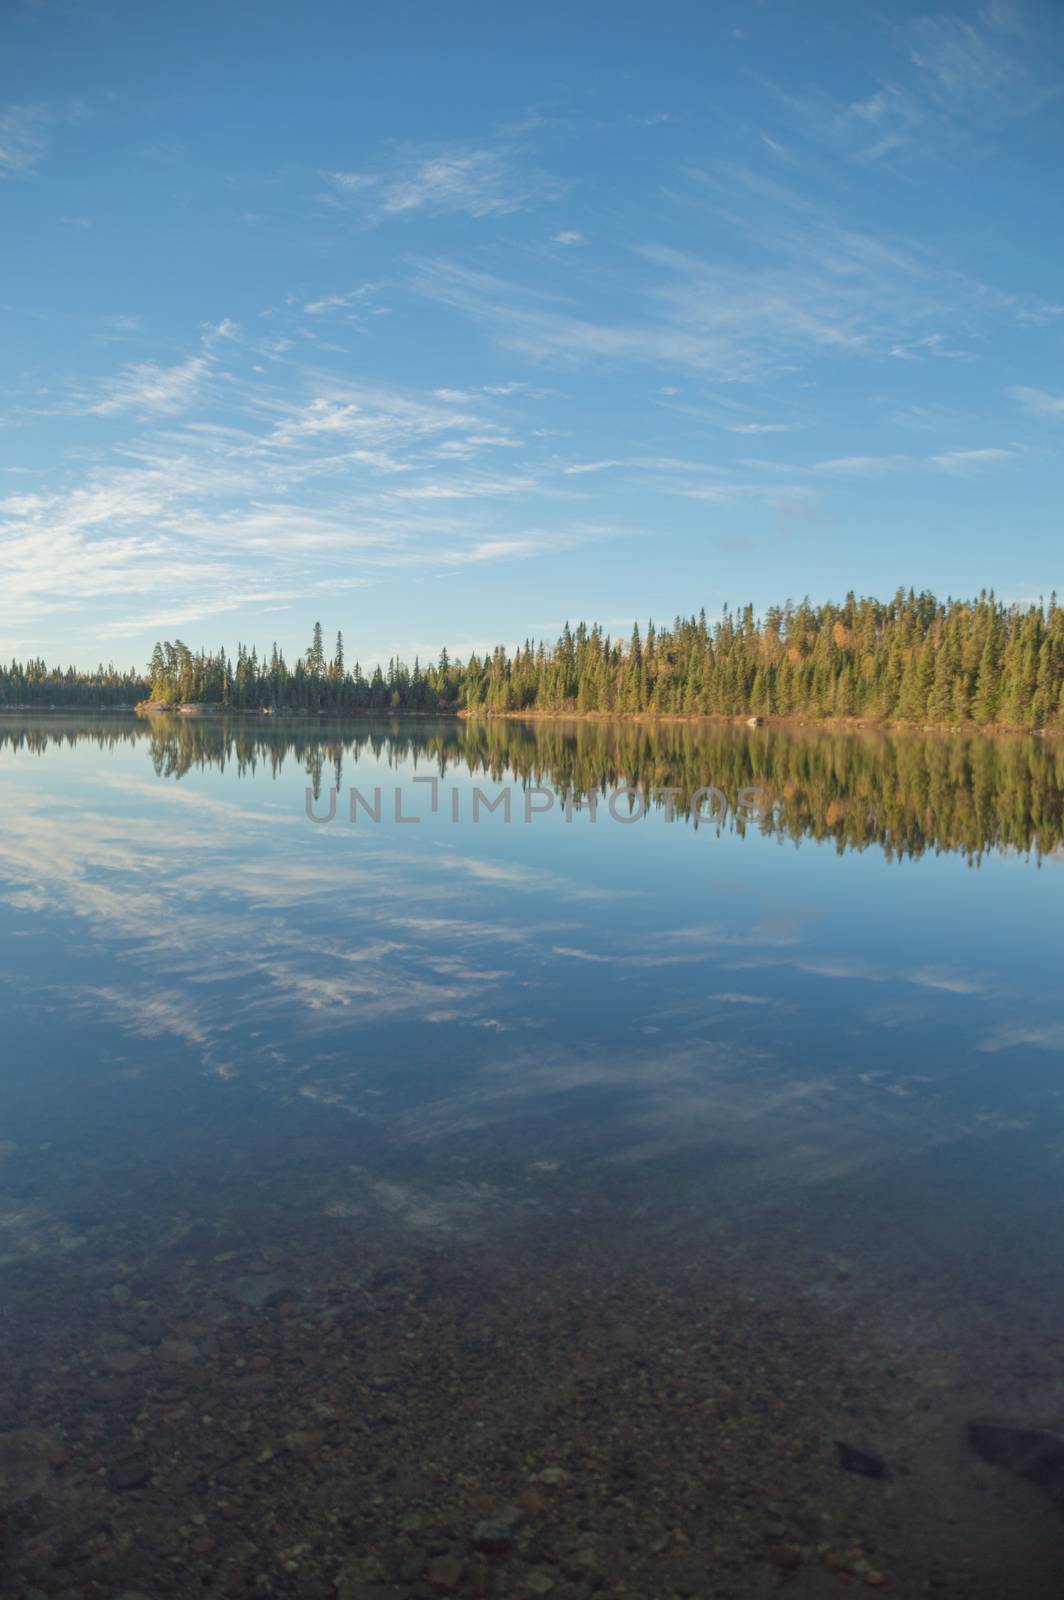 Dead calm lake in early morning with reflections of conifers and wispy cirrus clouds